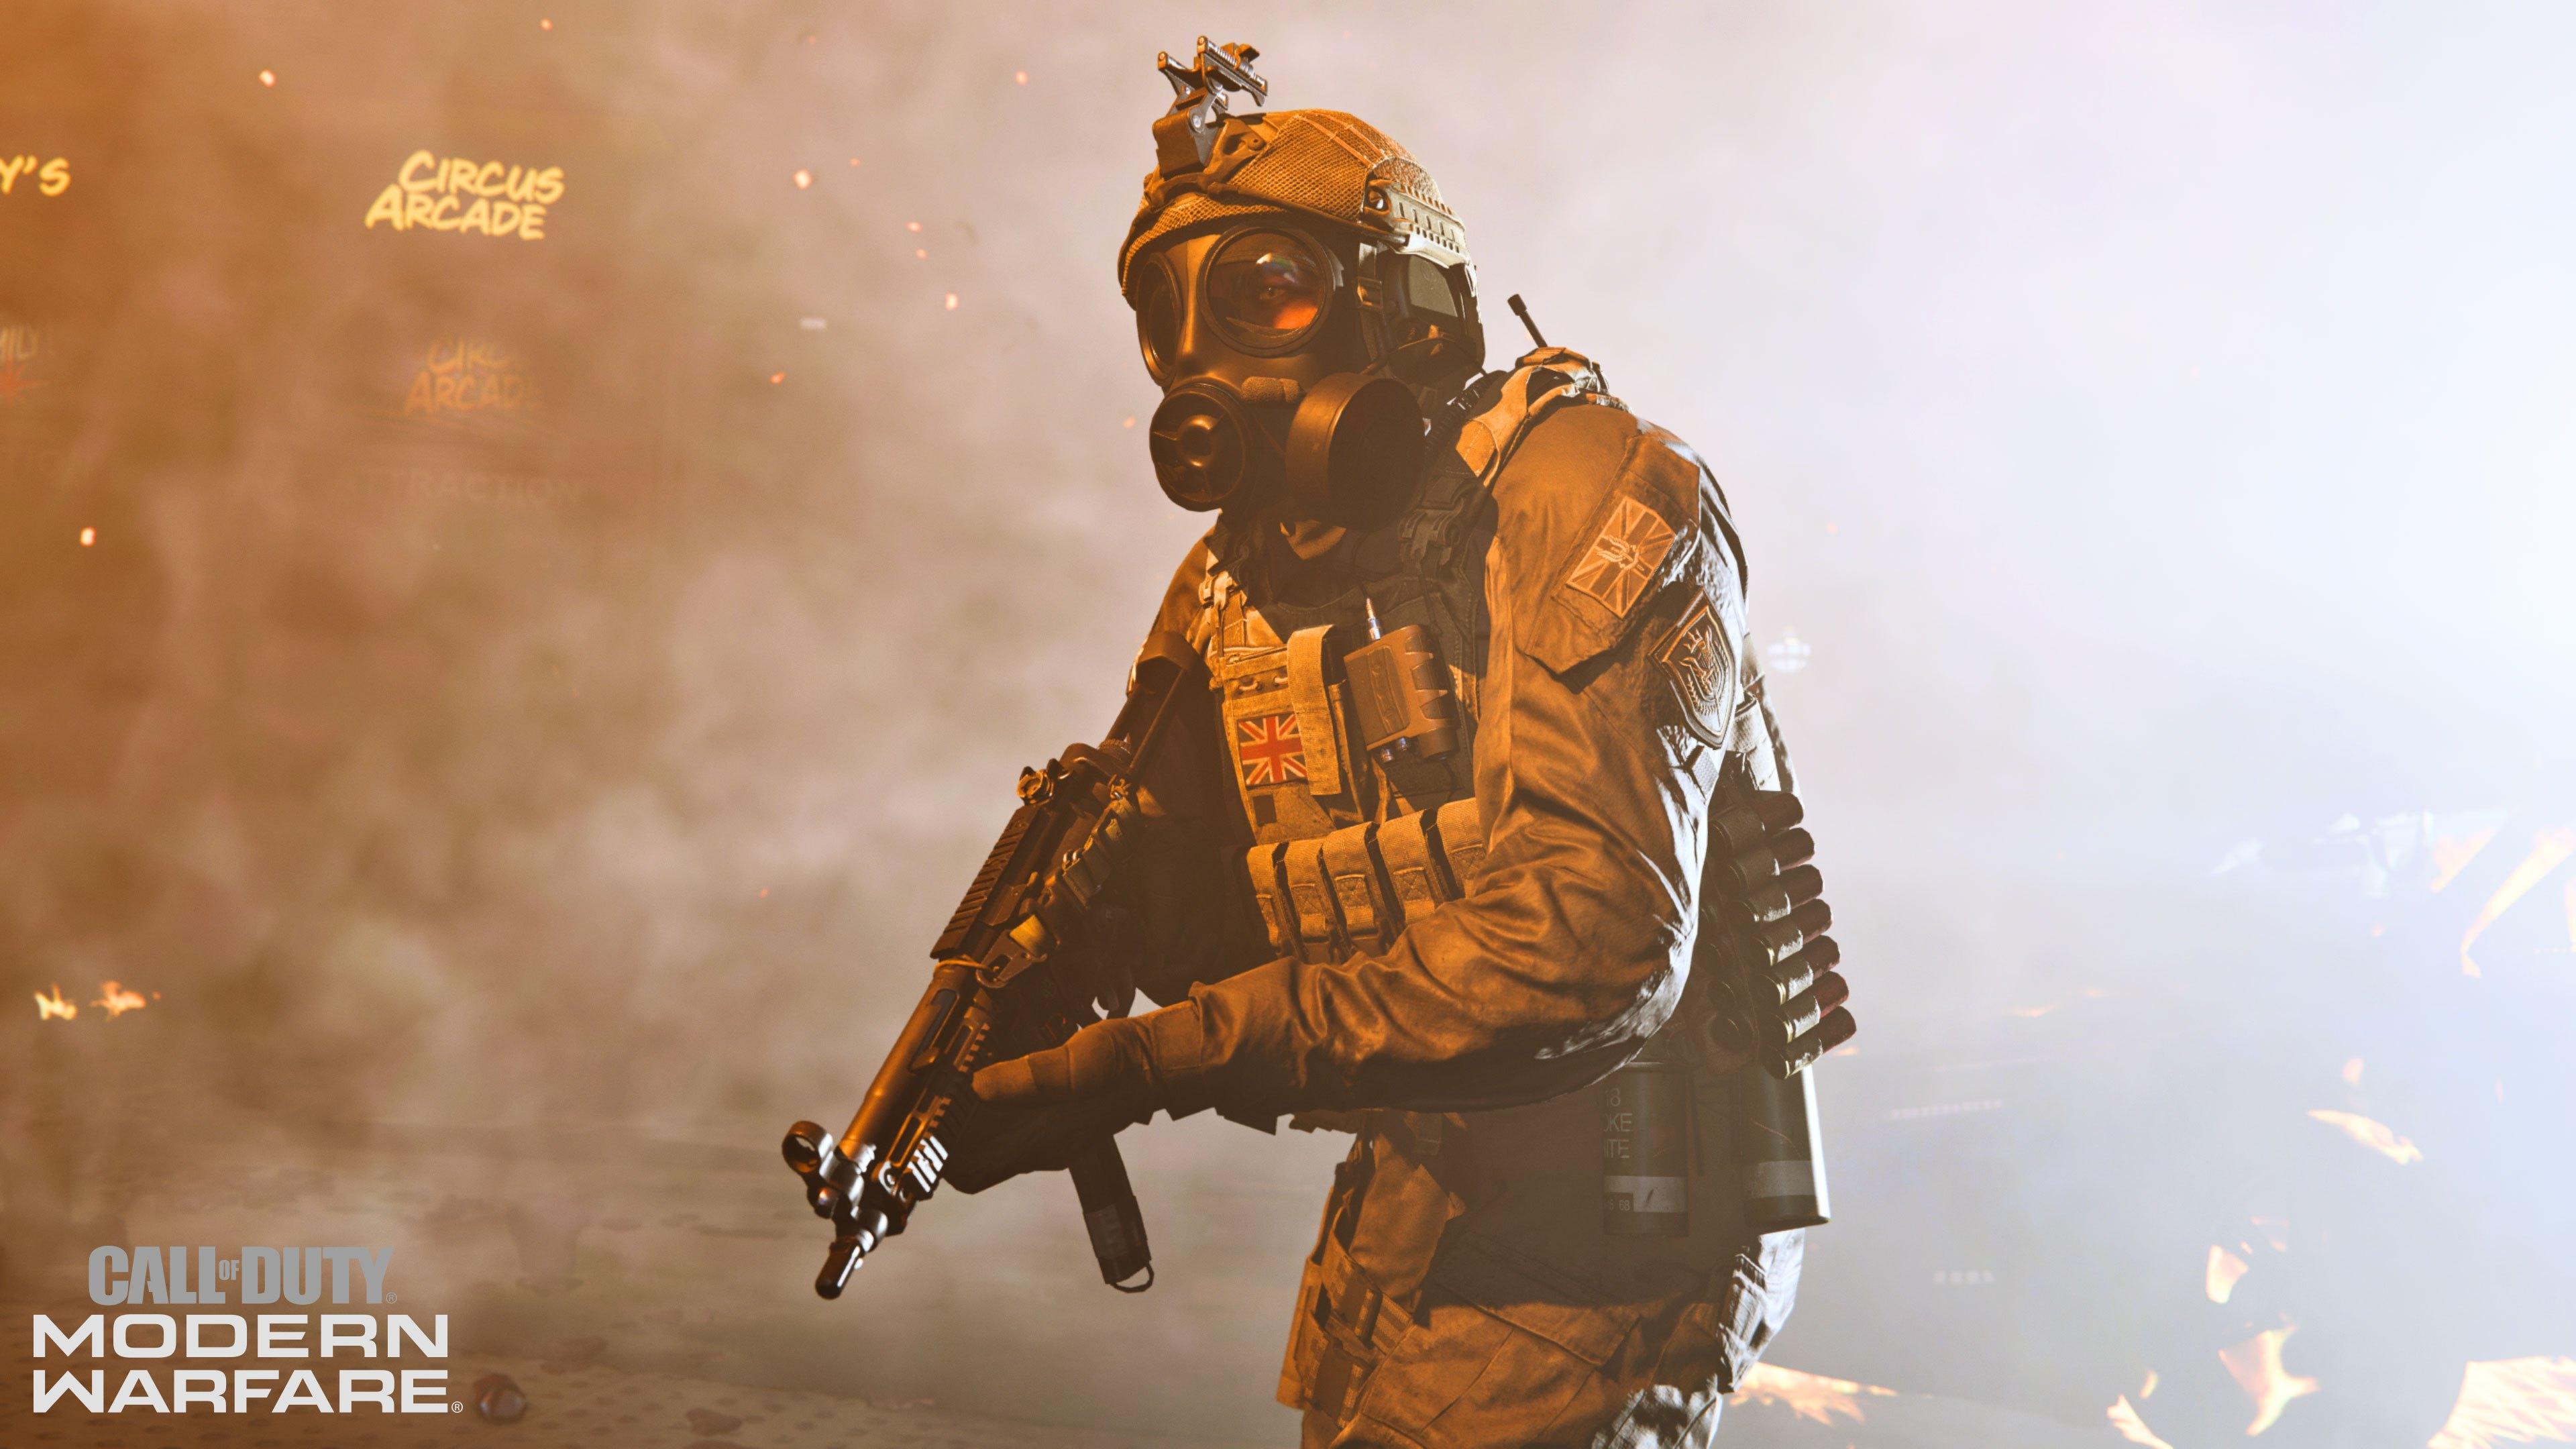 Call Of Duty: Modern Warfare review – reboots on the ground